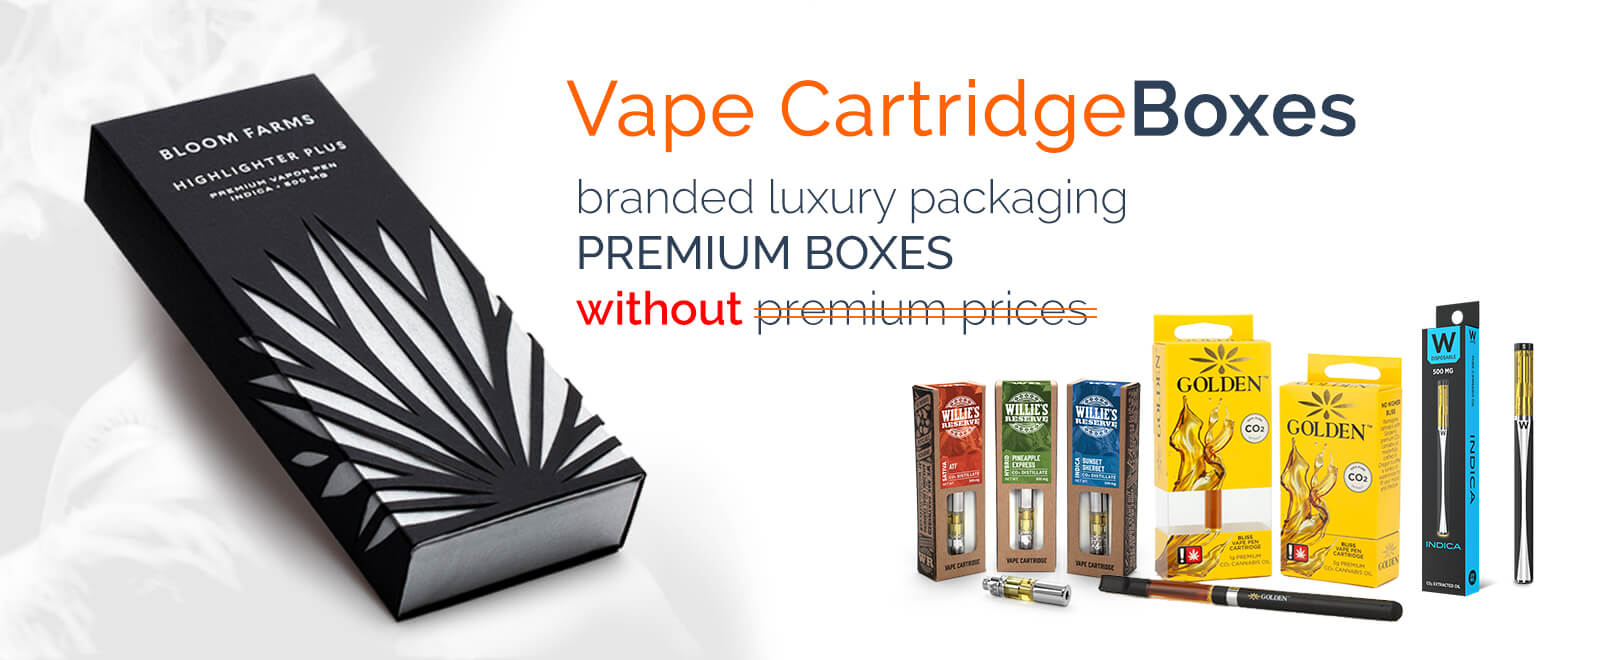 How To Win Buyers And Influence Sales With Vape Boxes?